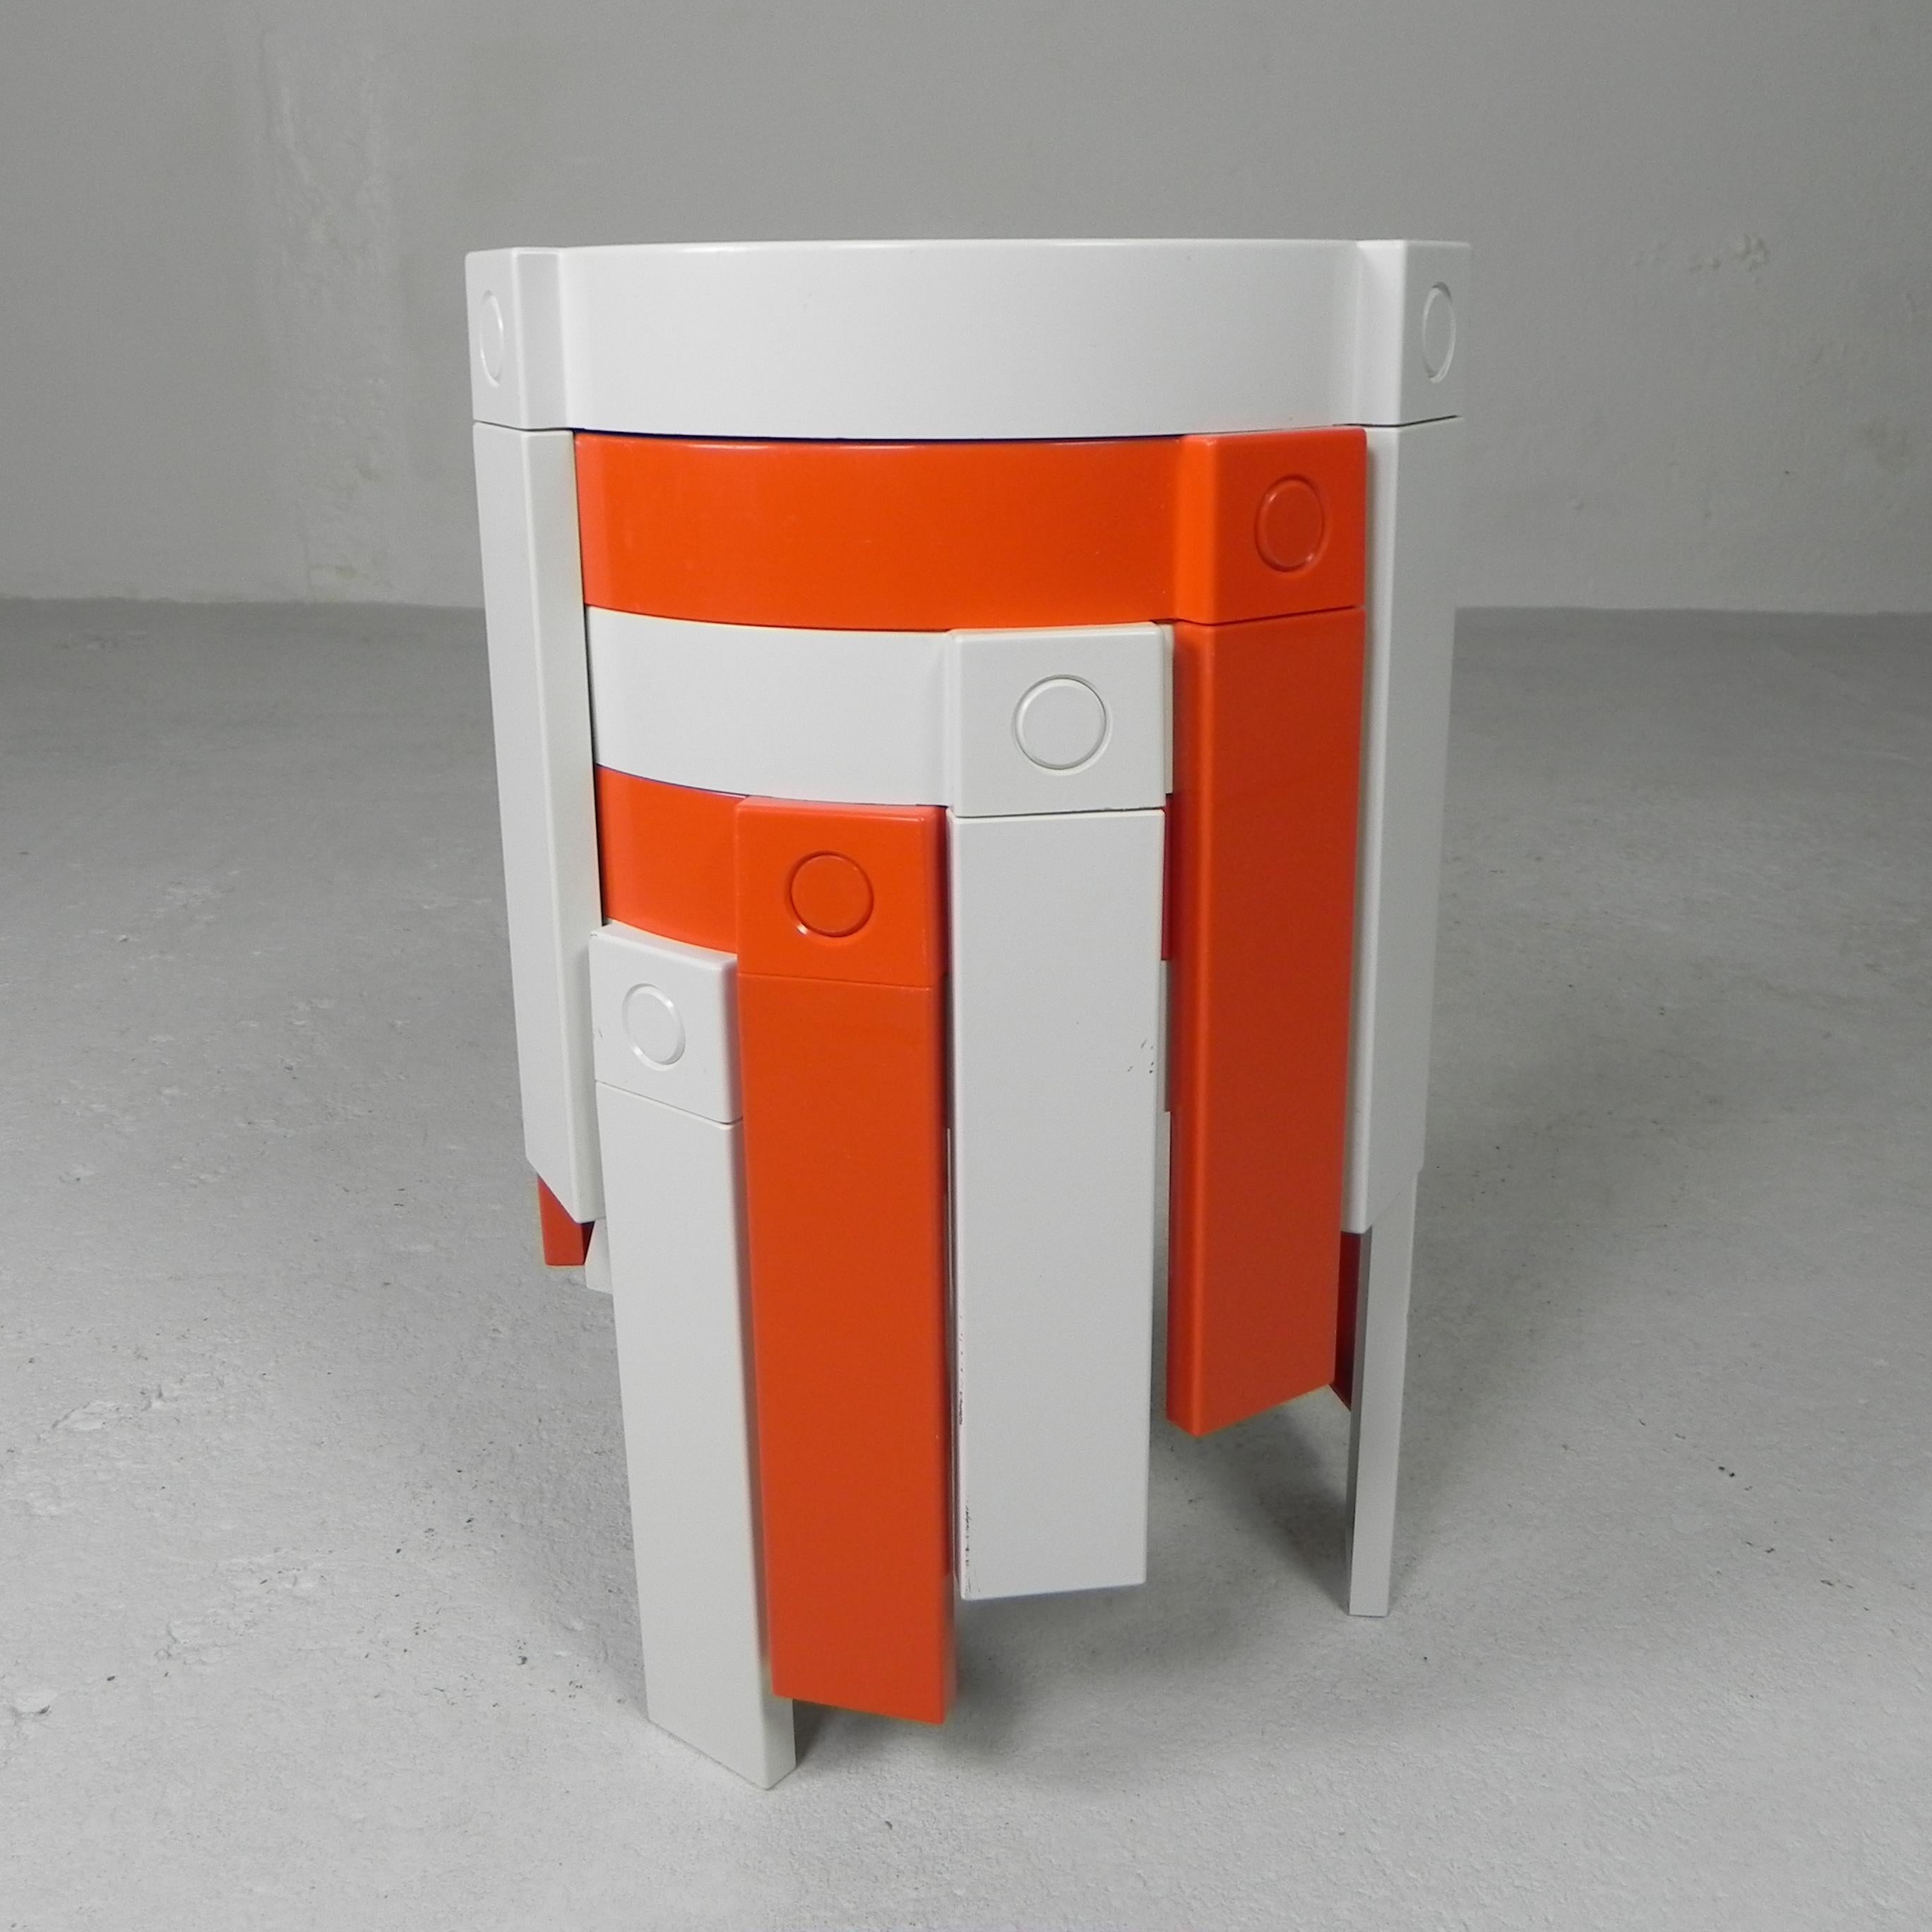 These 5 tables are easy to stack
into a beautiful orange/white tower.

Height: 30 cm.
Ø: 31 cm.
All tables are marked: 